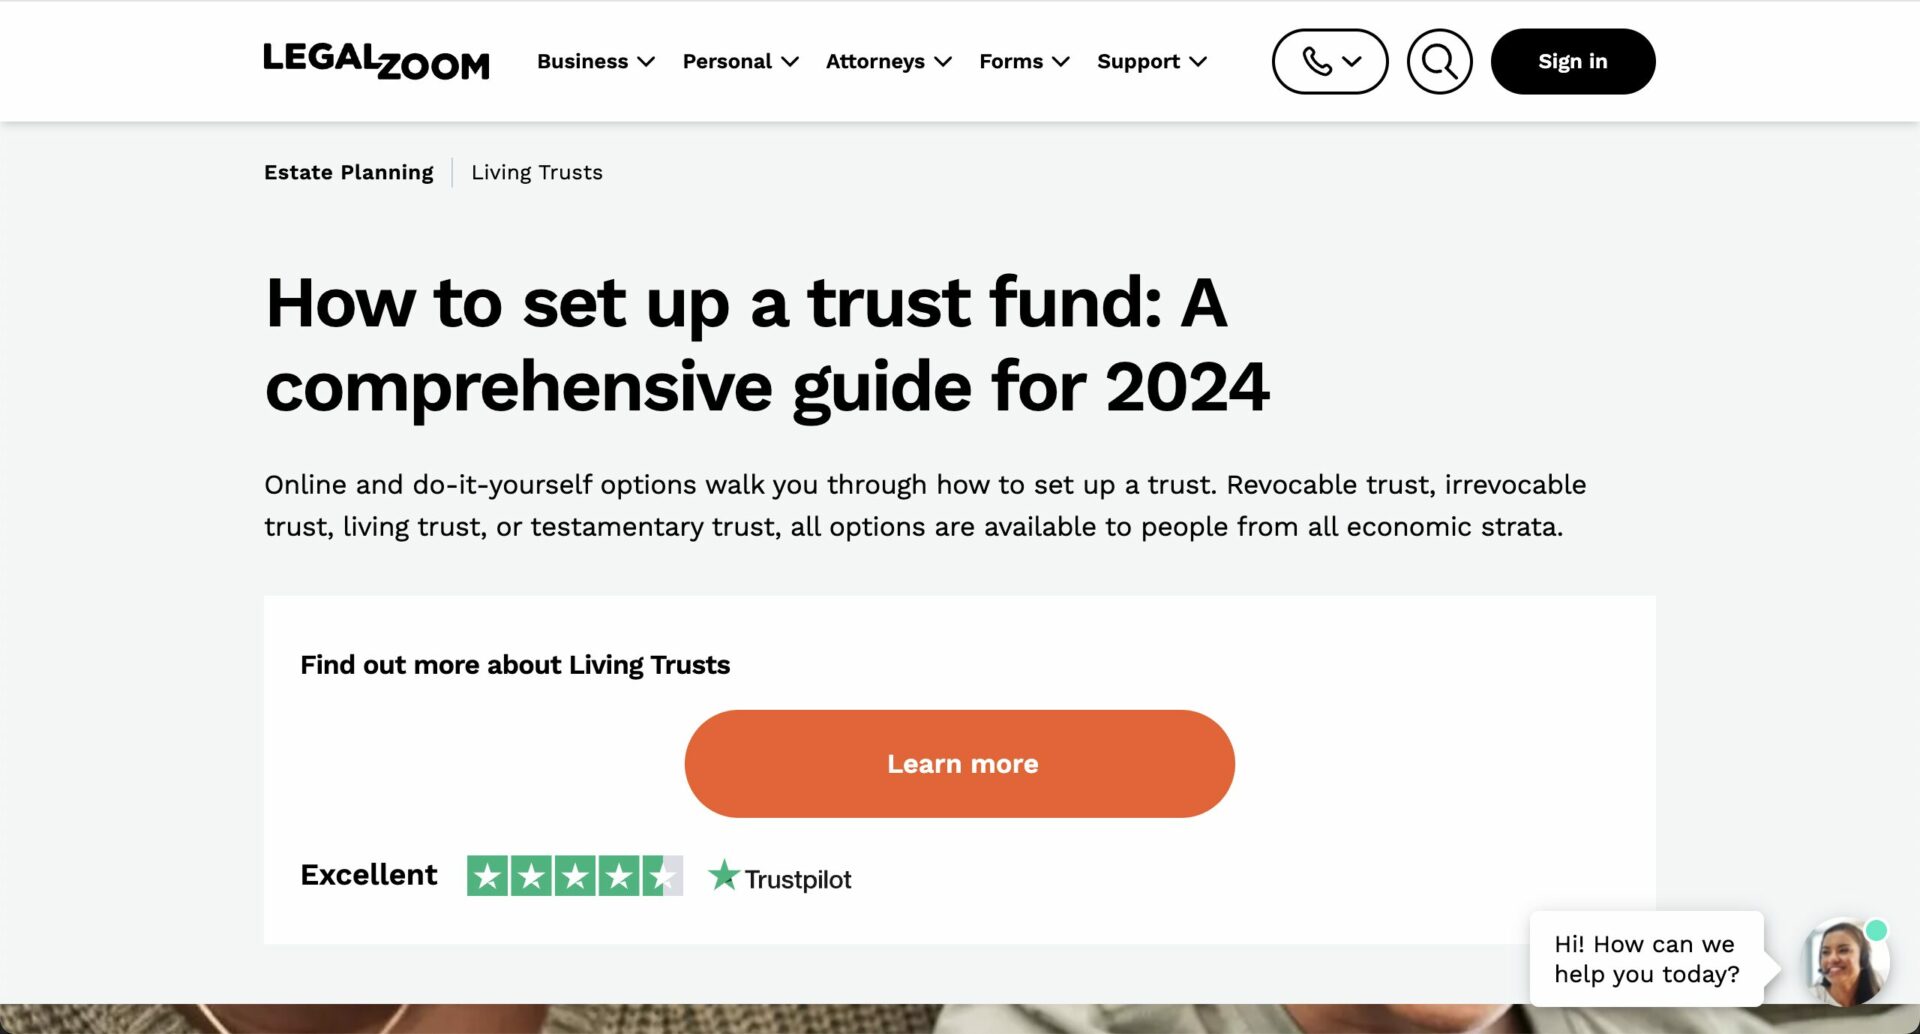 Finance-How-to-set-up-a-trust-fund-A-comprehensive-guide-for-2024